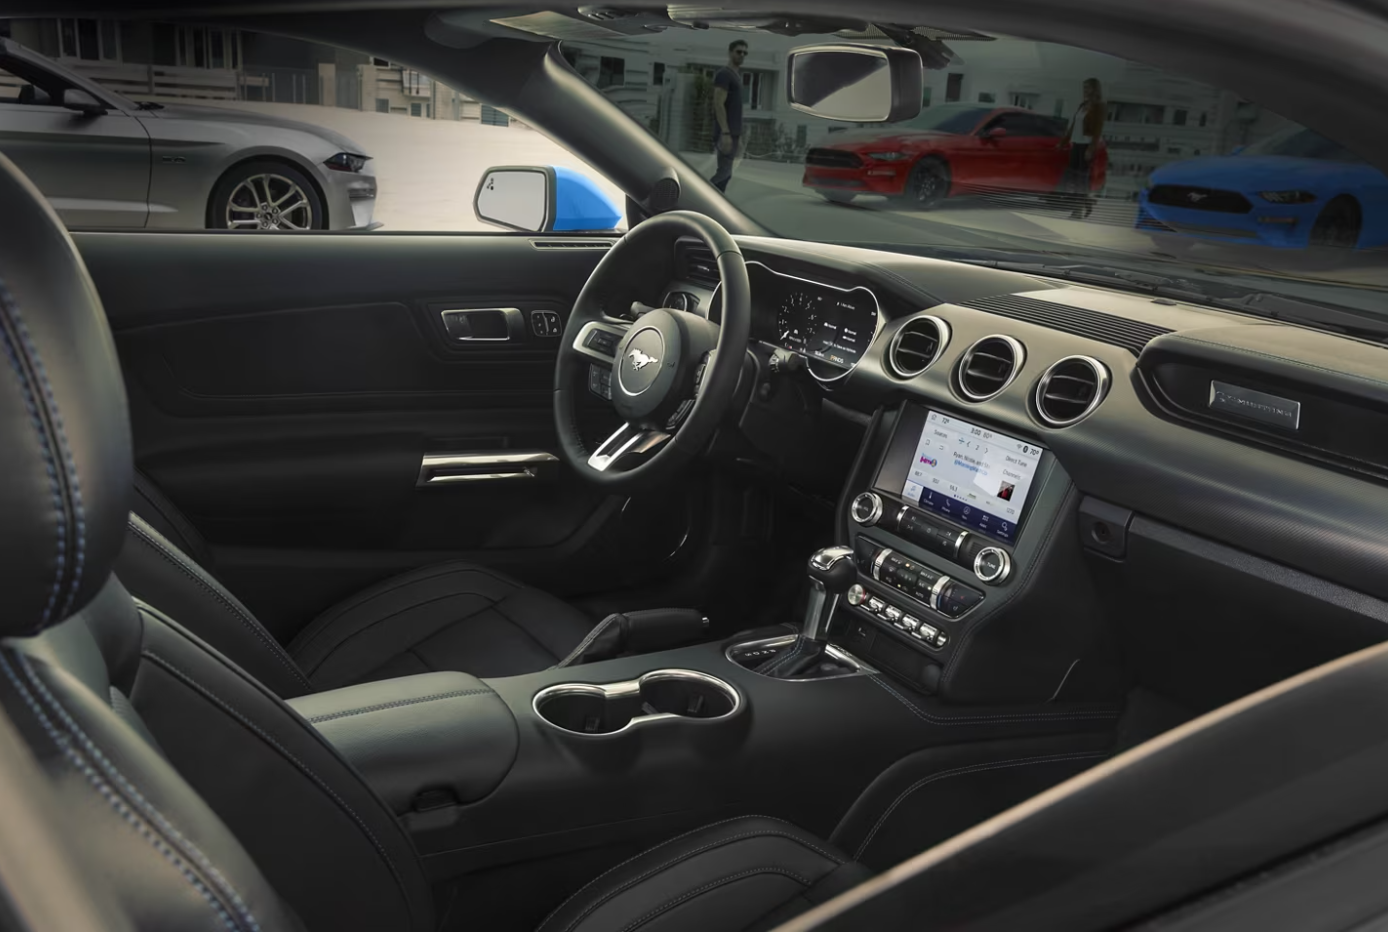 The dash and infotainment system of a 2023 Ford Mustang